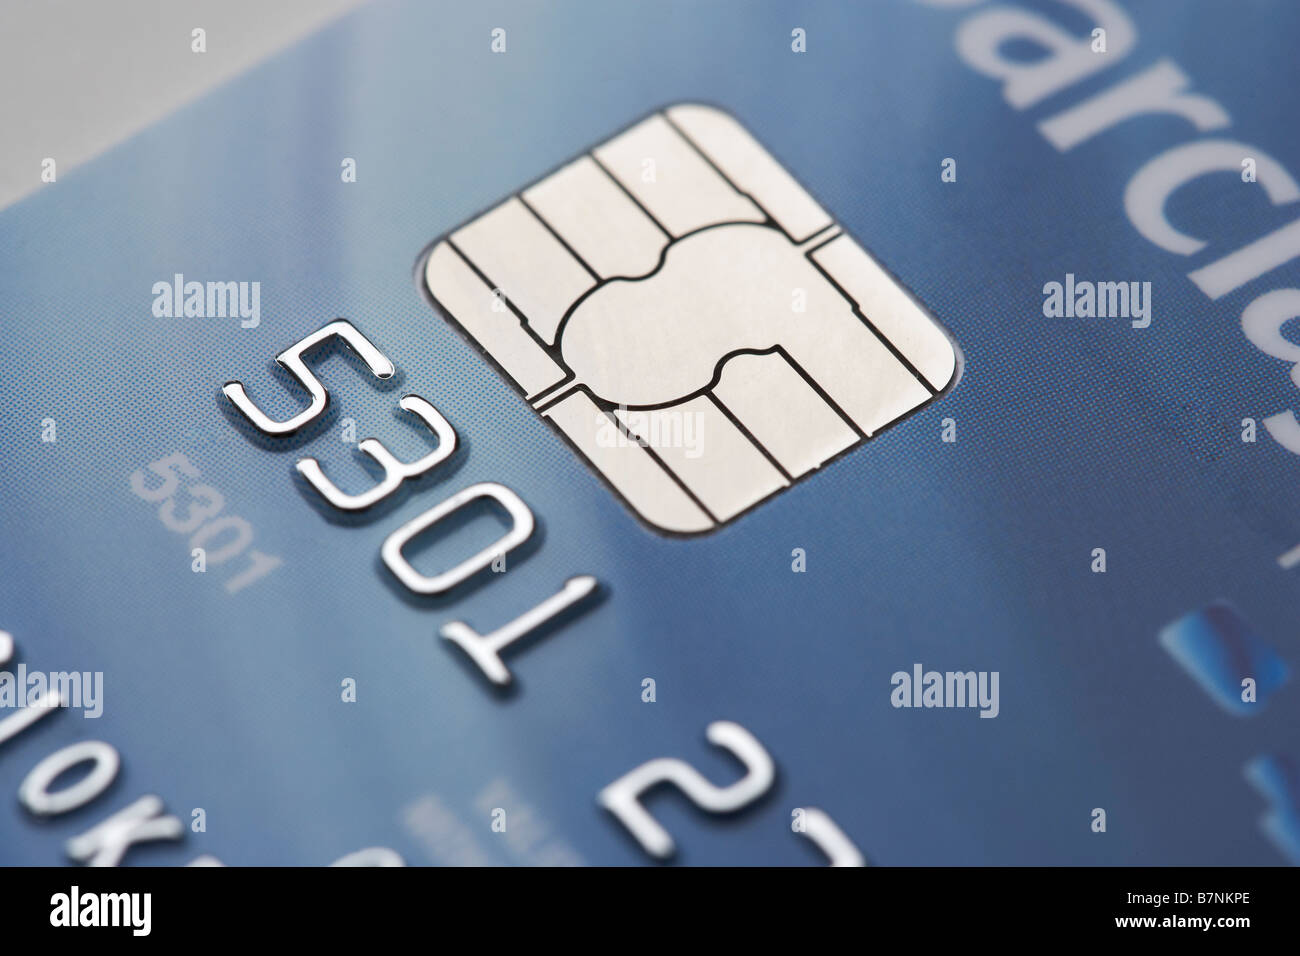 Detail of Barclaycard credit card Stock Photo